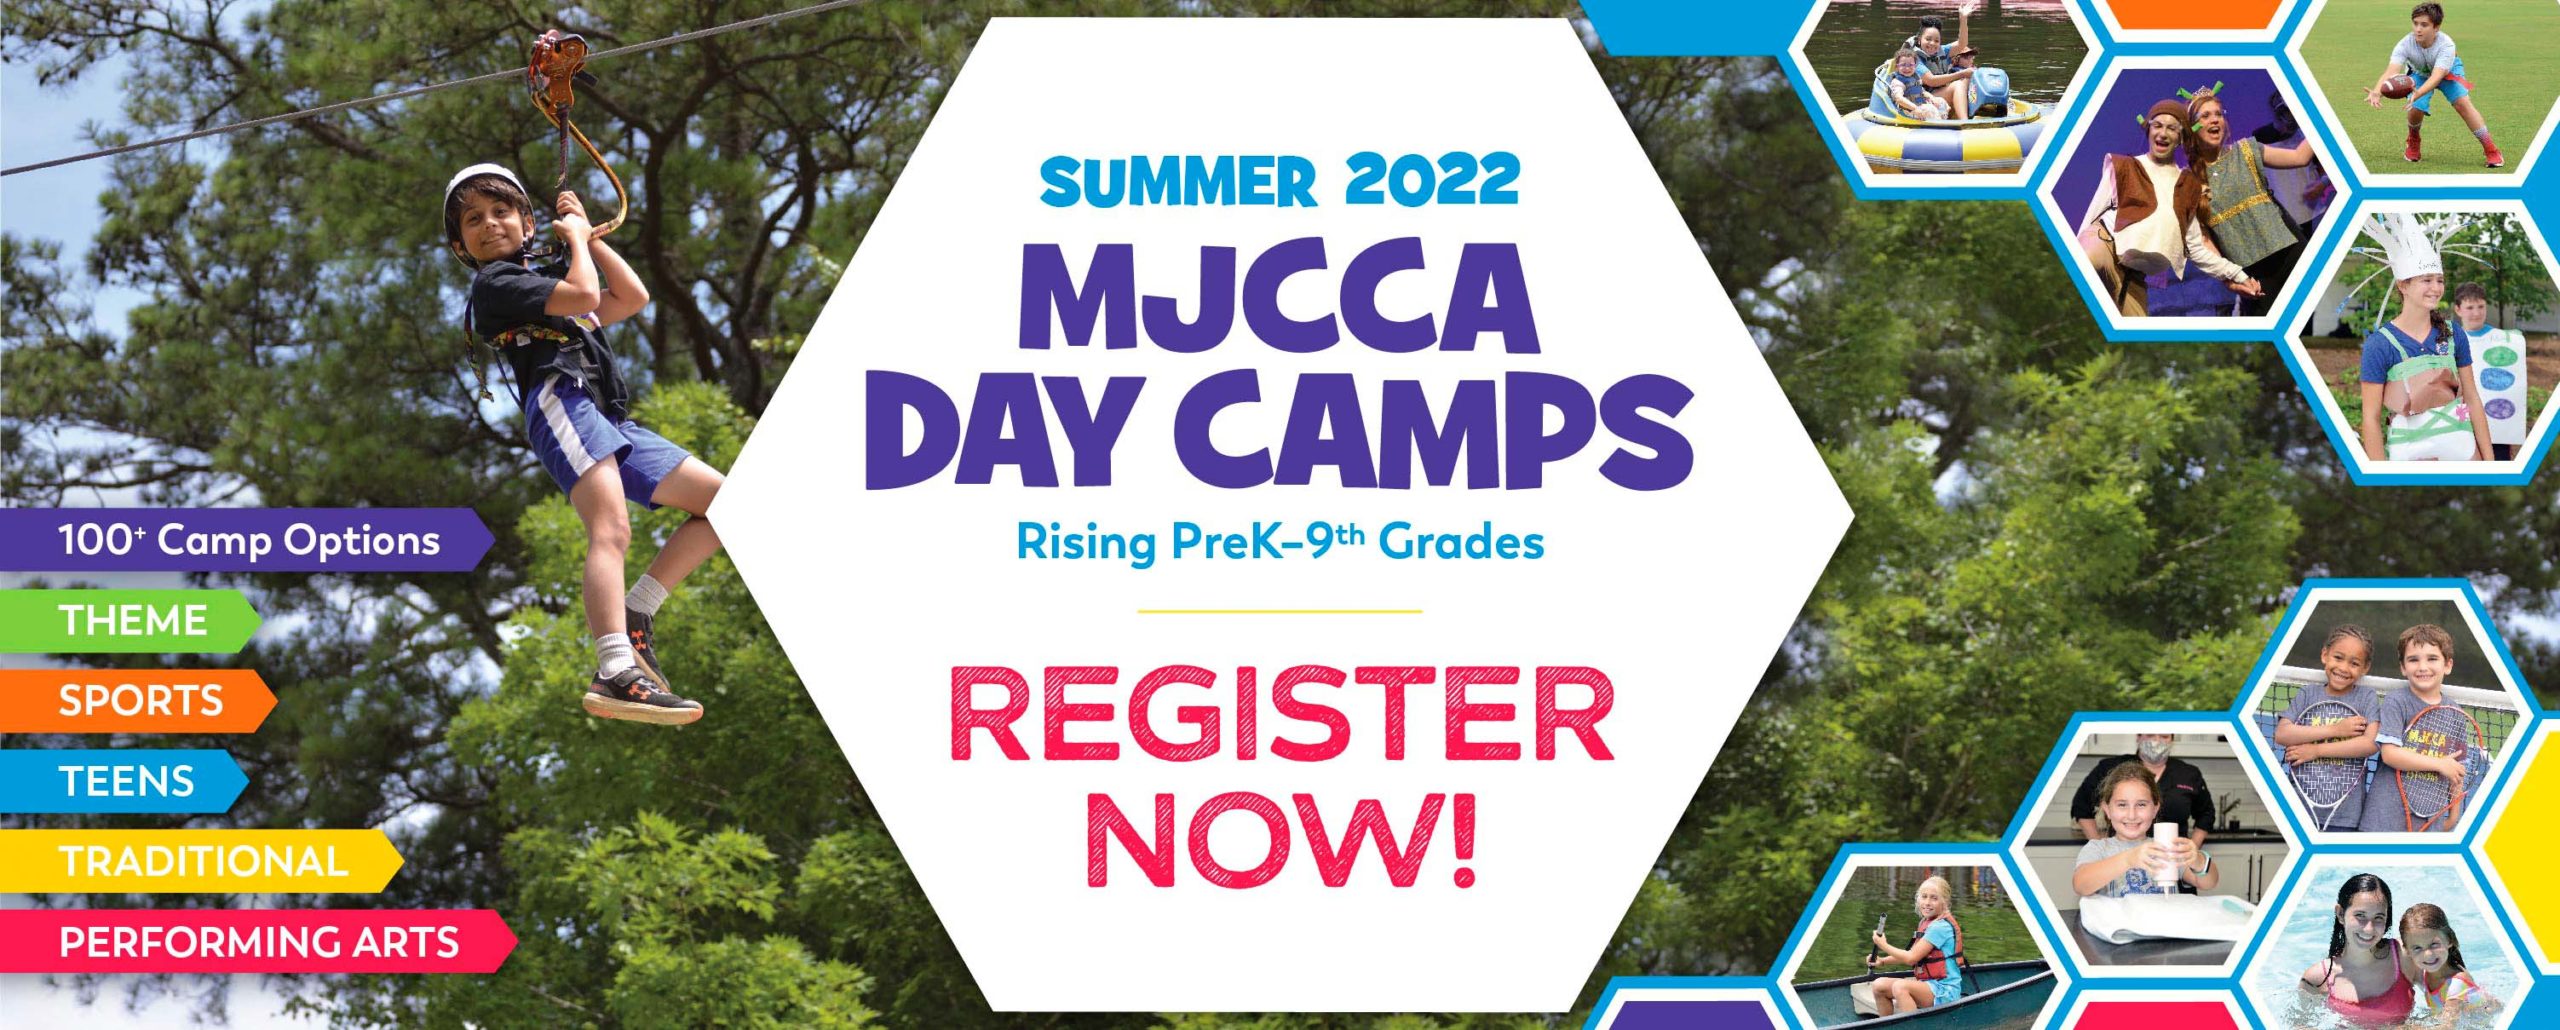 Register now for MJCCA Day Camps